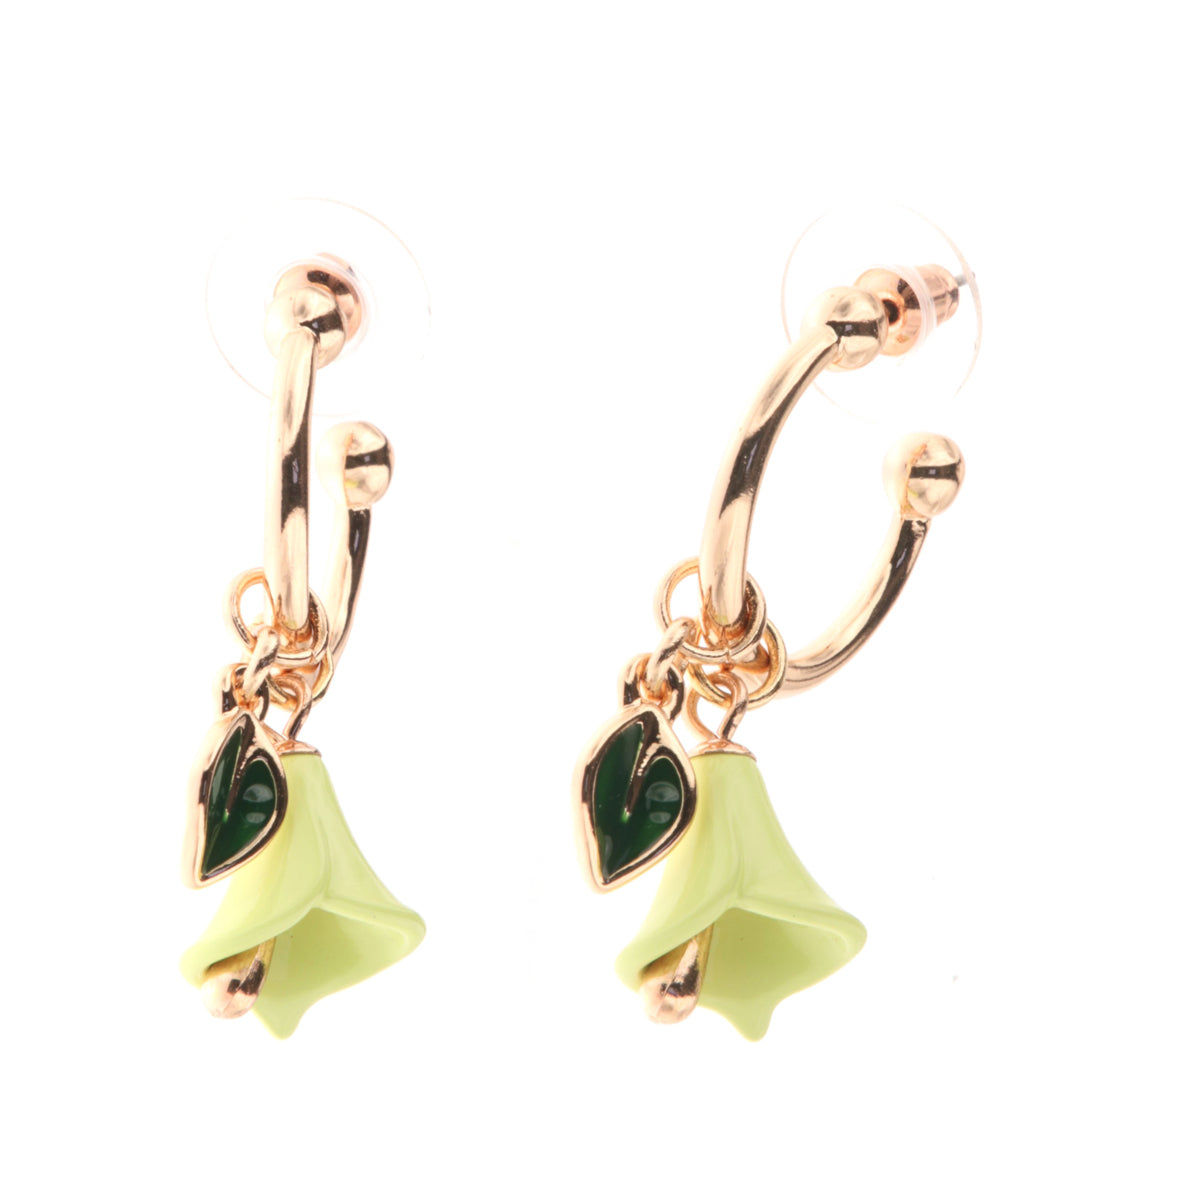 Semicarchie metal earrings with pendant bells in the shape of a calla